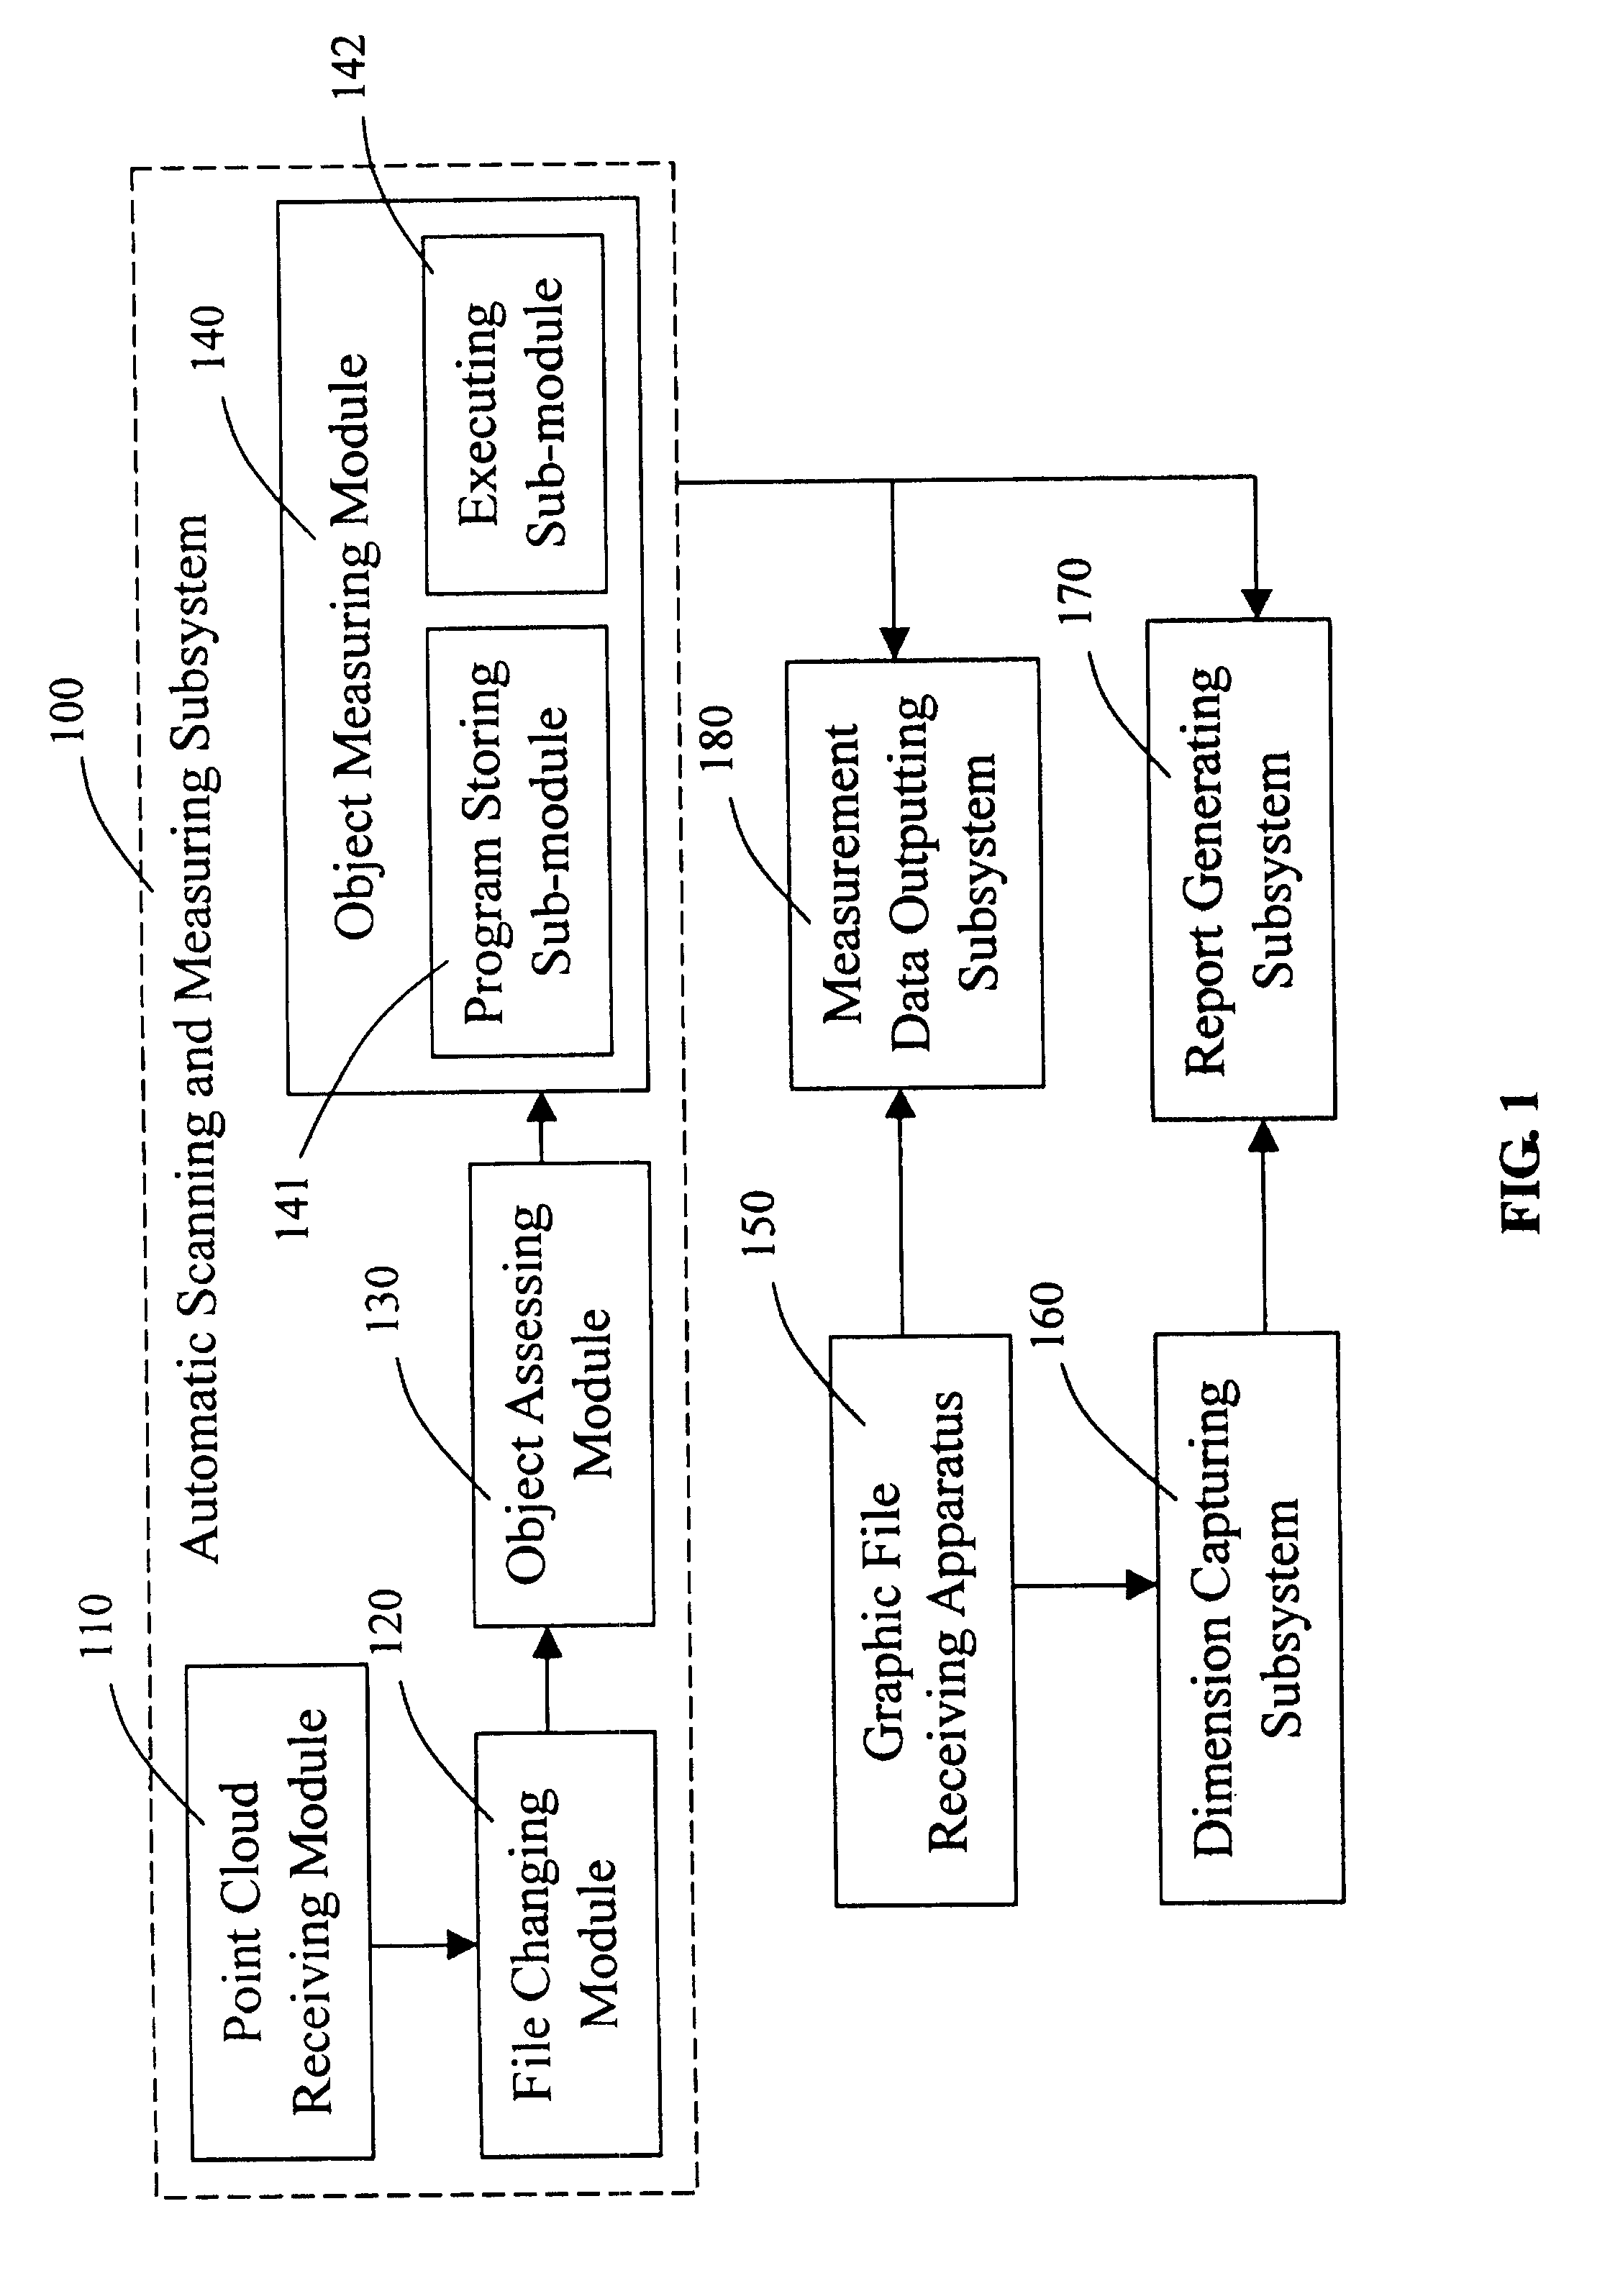 System and method for analyzing and processing data on an object